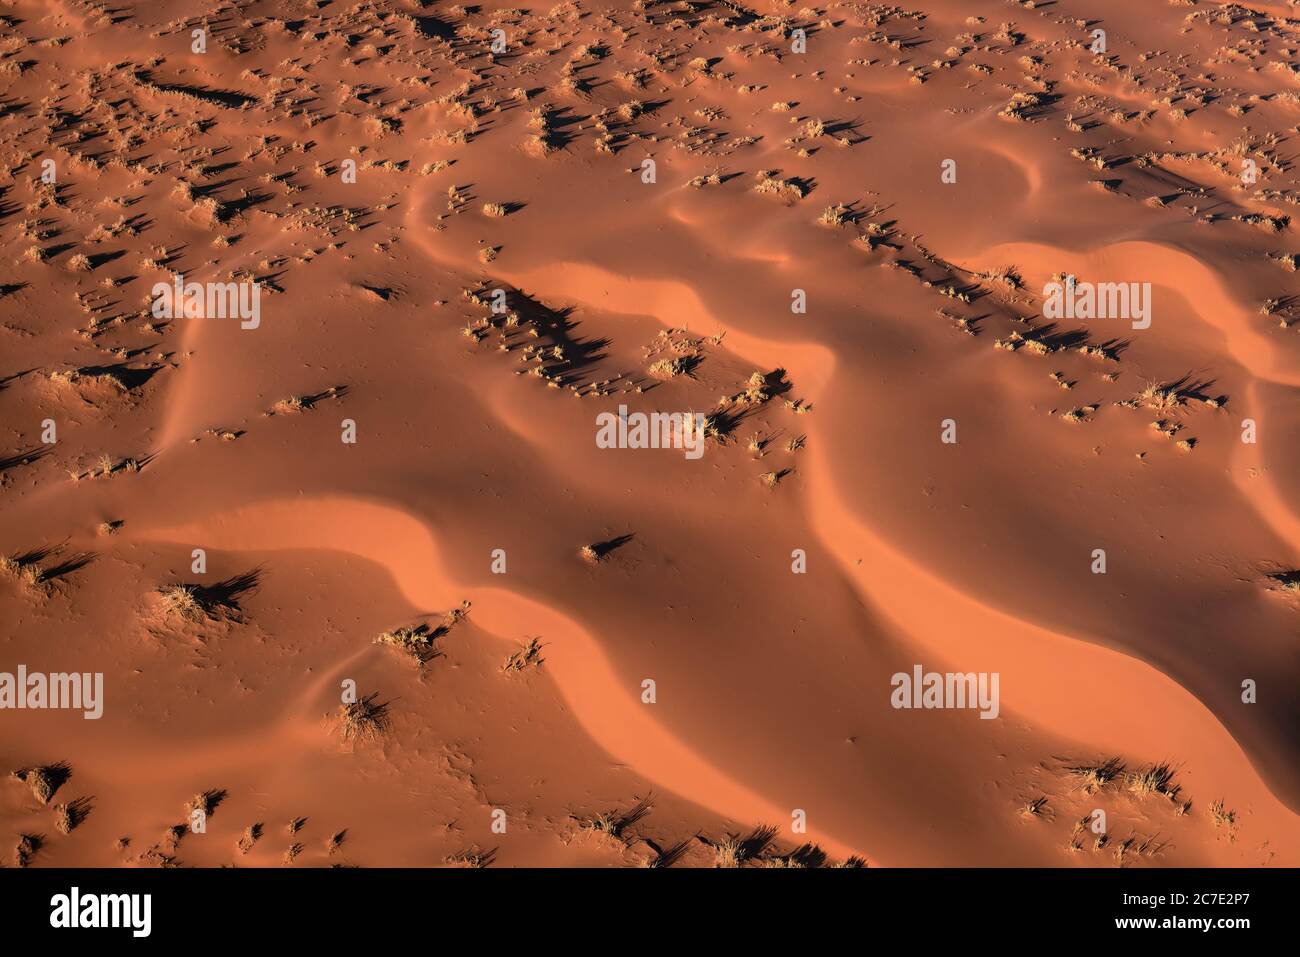 Aerial view of the sand dunes, located in the Namib Desert, in the Namib-Naukluft National Park, Namibia at sunrise. Stock Photo